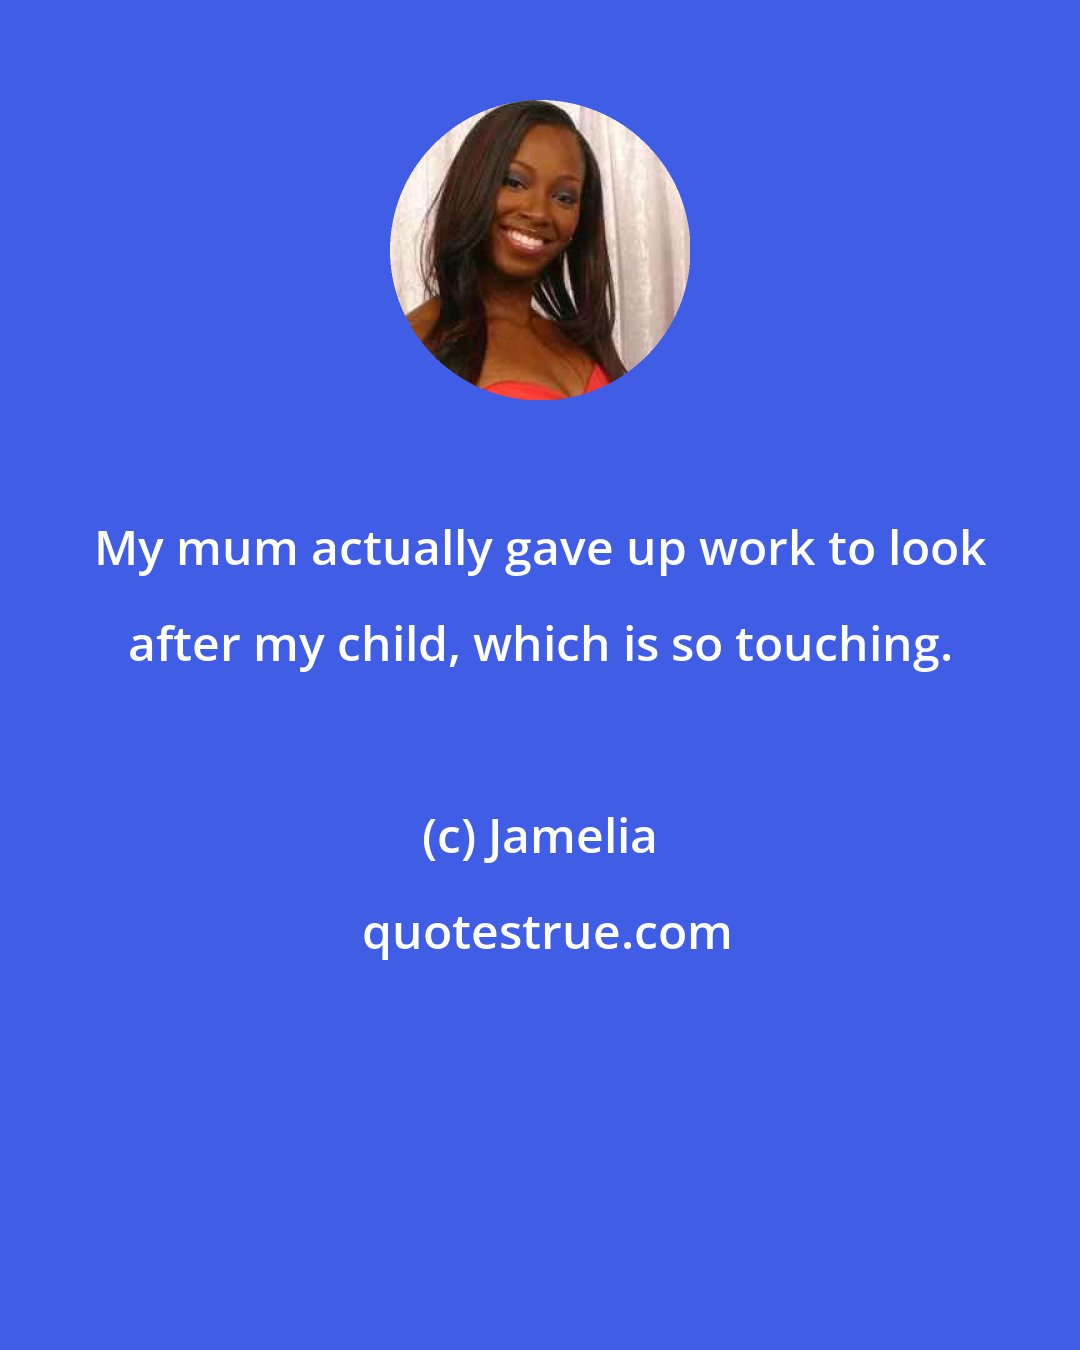 Jamelia: My mum actually gave up work to look after my child, which is so touching.